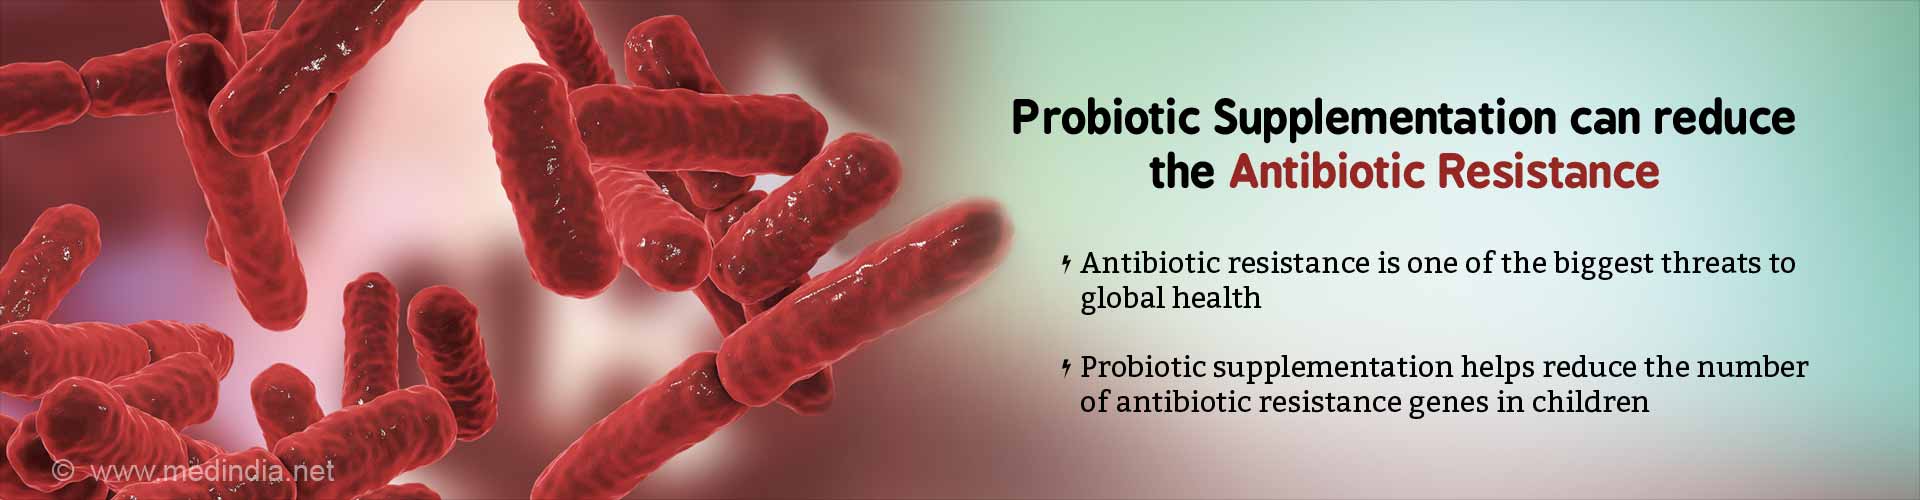 probiotic supplementation can reduce the antibiotics resistance
- antiobiotic resistance is one of the biggest threats to good health
- probiotic supplementation helps reduce the number of antiobiotic resistance genes in children